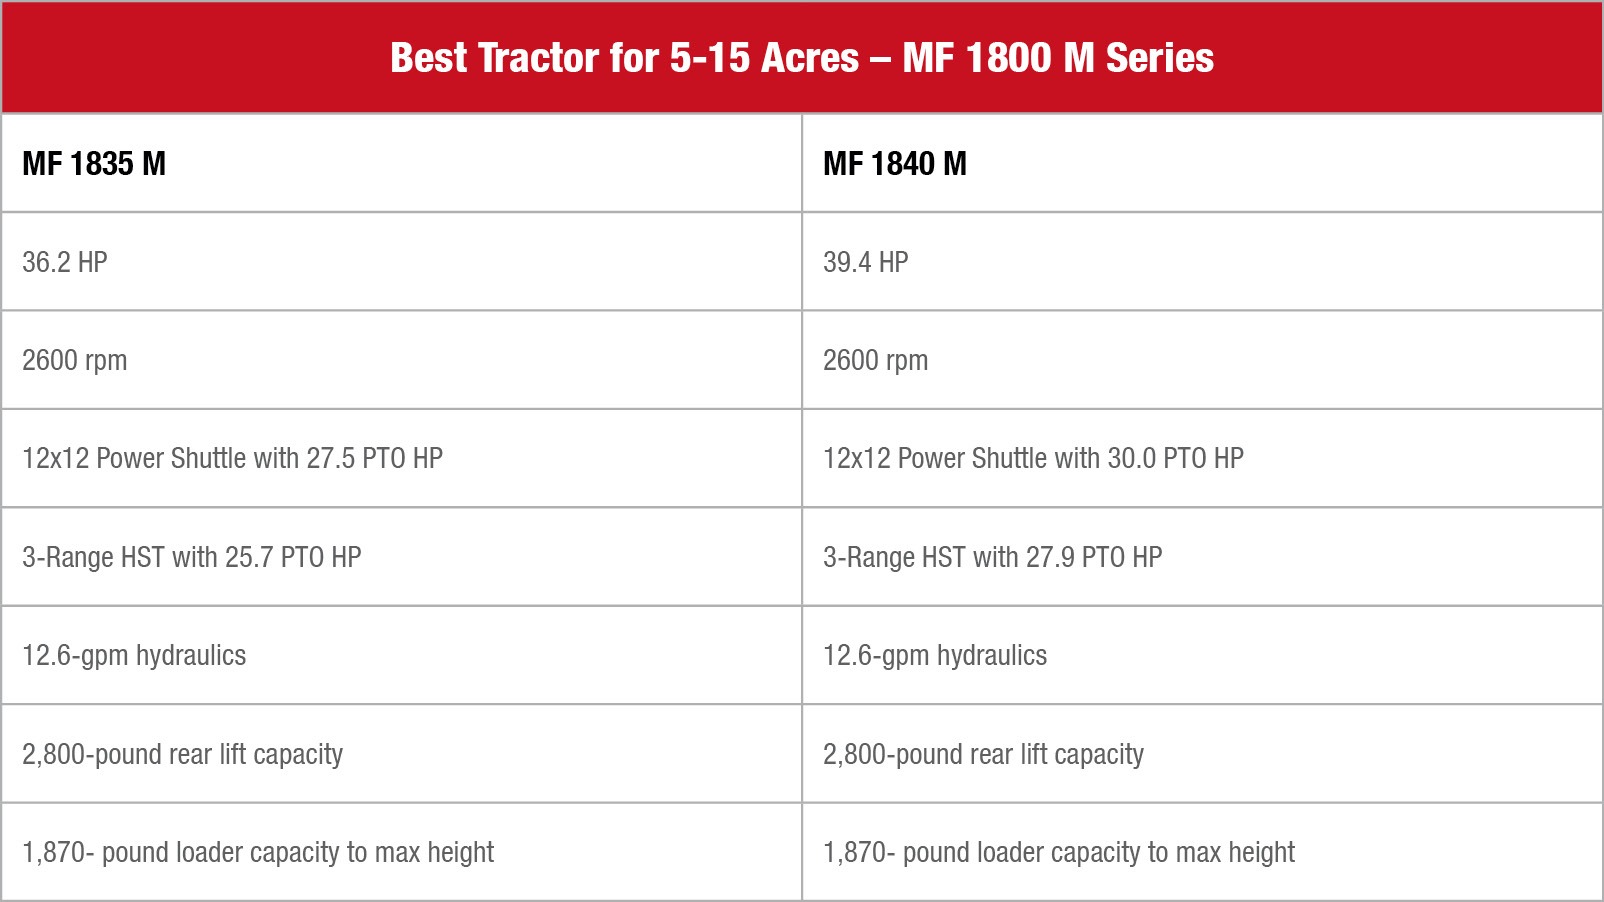 MF 1800 M Series Specifications